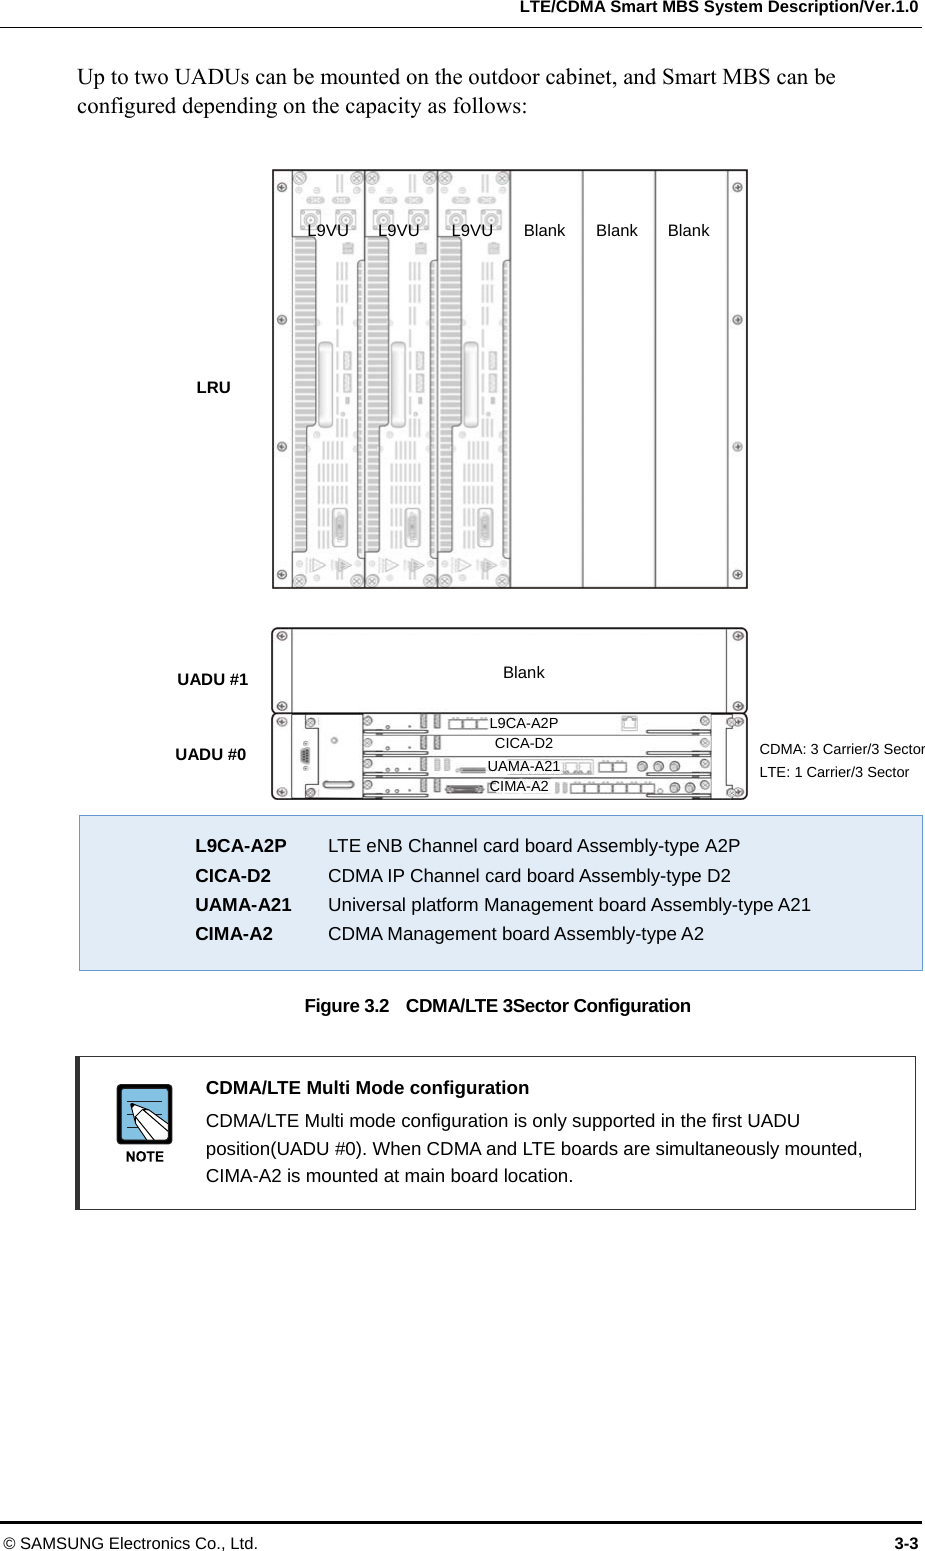   LTE/CDMA Smart MBS System Description/Ver.1.0 © SAMSUNG Electronics Co., Ltd.  3-3 Up to two UADUs can be mounted on the outdoor cabinet, and Smart MBS can be configured depending on the capacity as follows:  L9CA-A2P  LTE eNB Channel card board Assembly-type A2P CICA-D2  CDMA IP Channel card board Assembly-type D2 UAMA-A21  Universal platform Management board Assembly-type A21 CIMA-A2  CDMA Management board Assembly-type A2 Figure 3.2    CDMA/LTE 3Sector Configuration   CDMA/LTE Multi Mode configuration  CDMA/LTE Multi mode configuration is only supported in the first UADU position(UADU #0). When CDMA and LTE boards are simultaneously mounted, CIMA-A2 is mounted at main board location.  Blank CDMA: 3 Carrier/3 Sector LTE: 1 Carrier/3 Sector Blank Blank Blank L9VU L9VU  L9VU L9CA-A2PCICA-D2 UAMA-A21CIMA-A2 UADU #0 UADU #1 LRU 